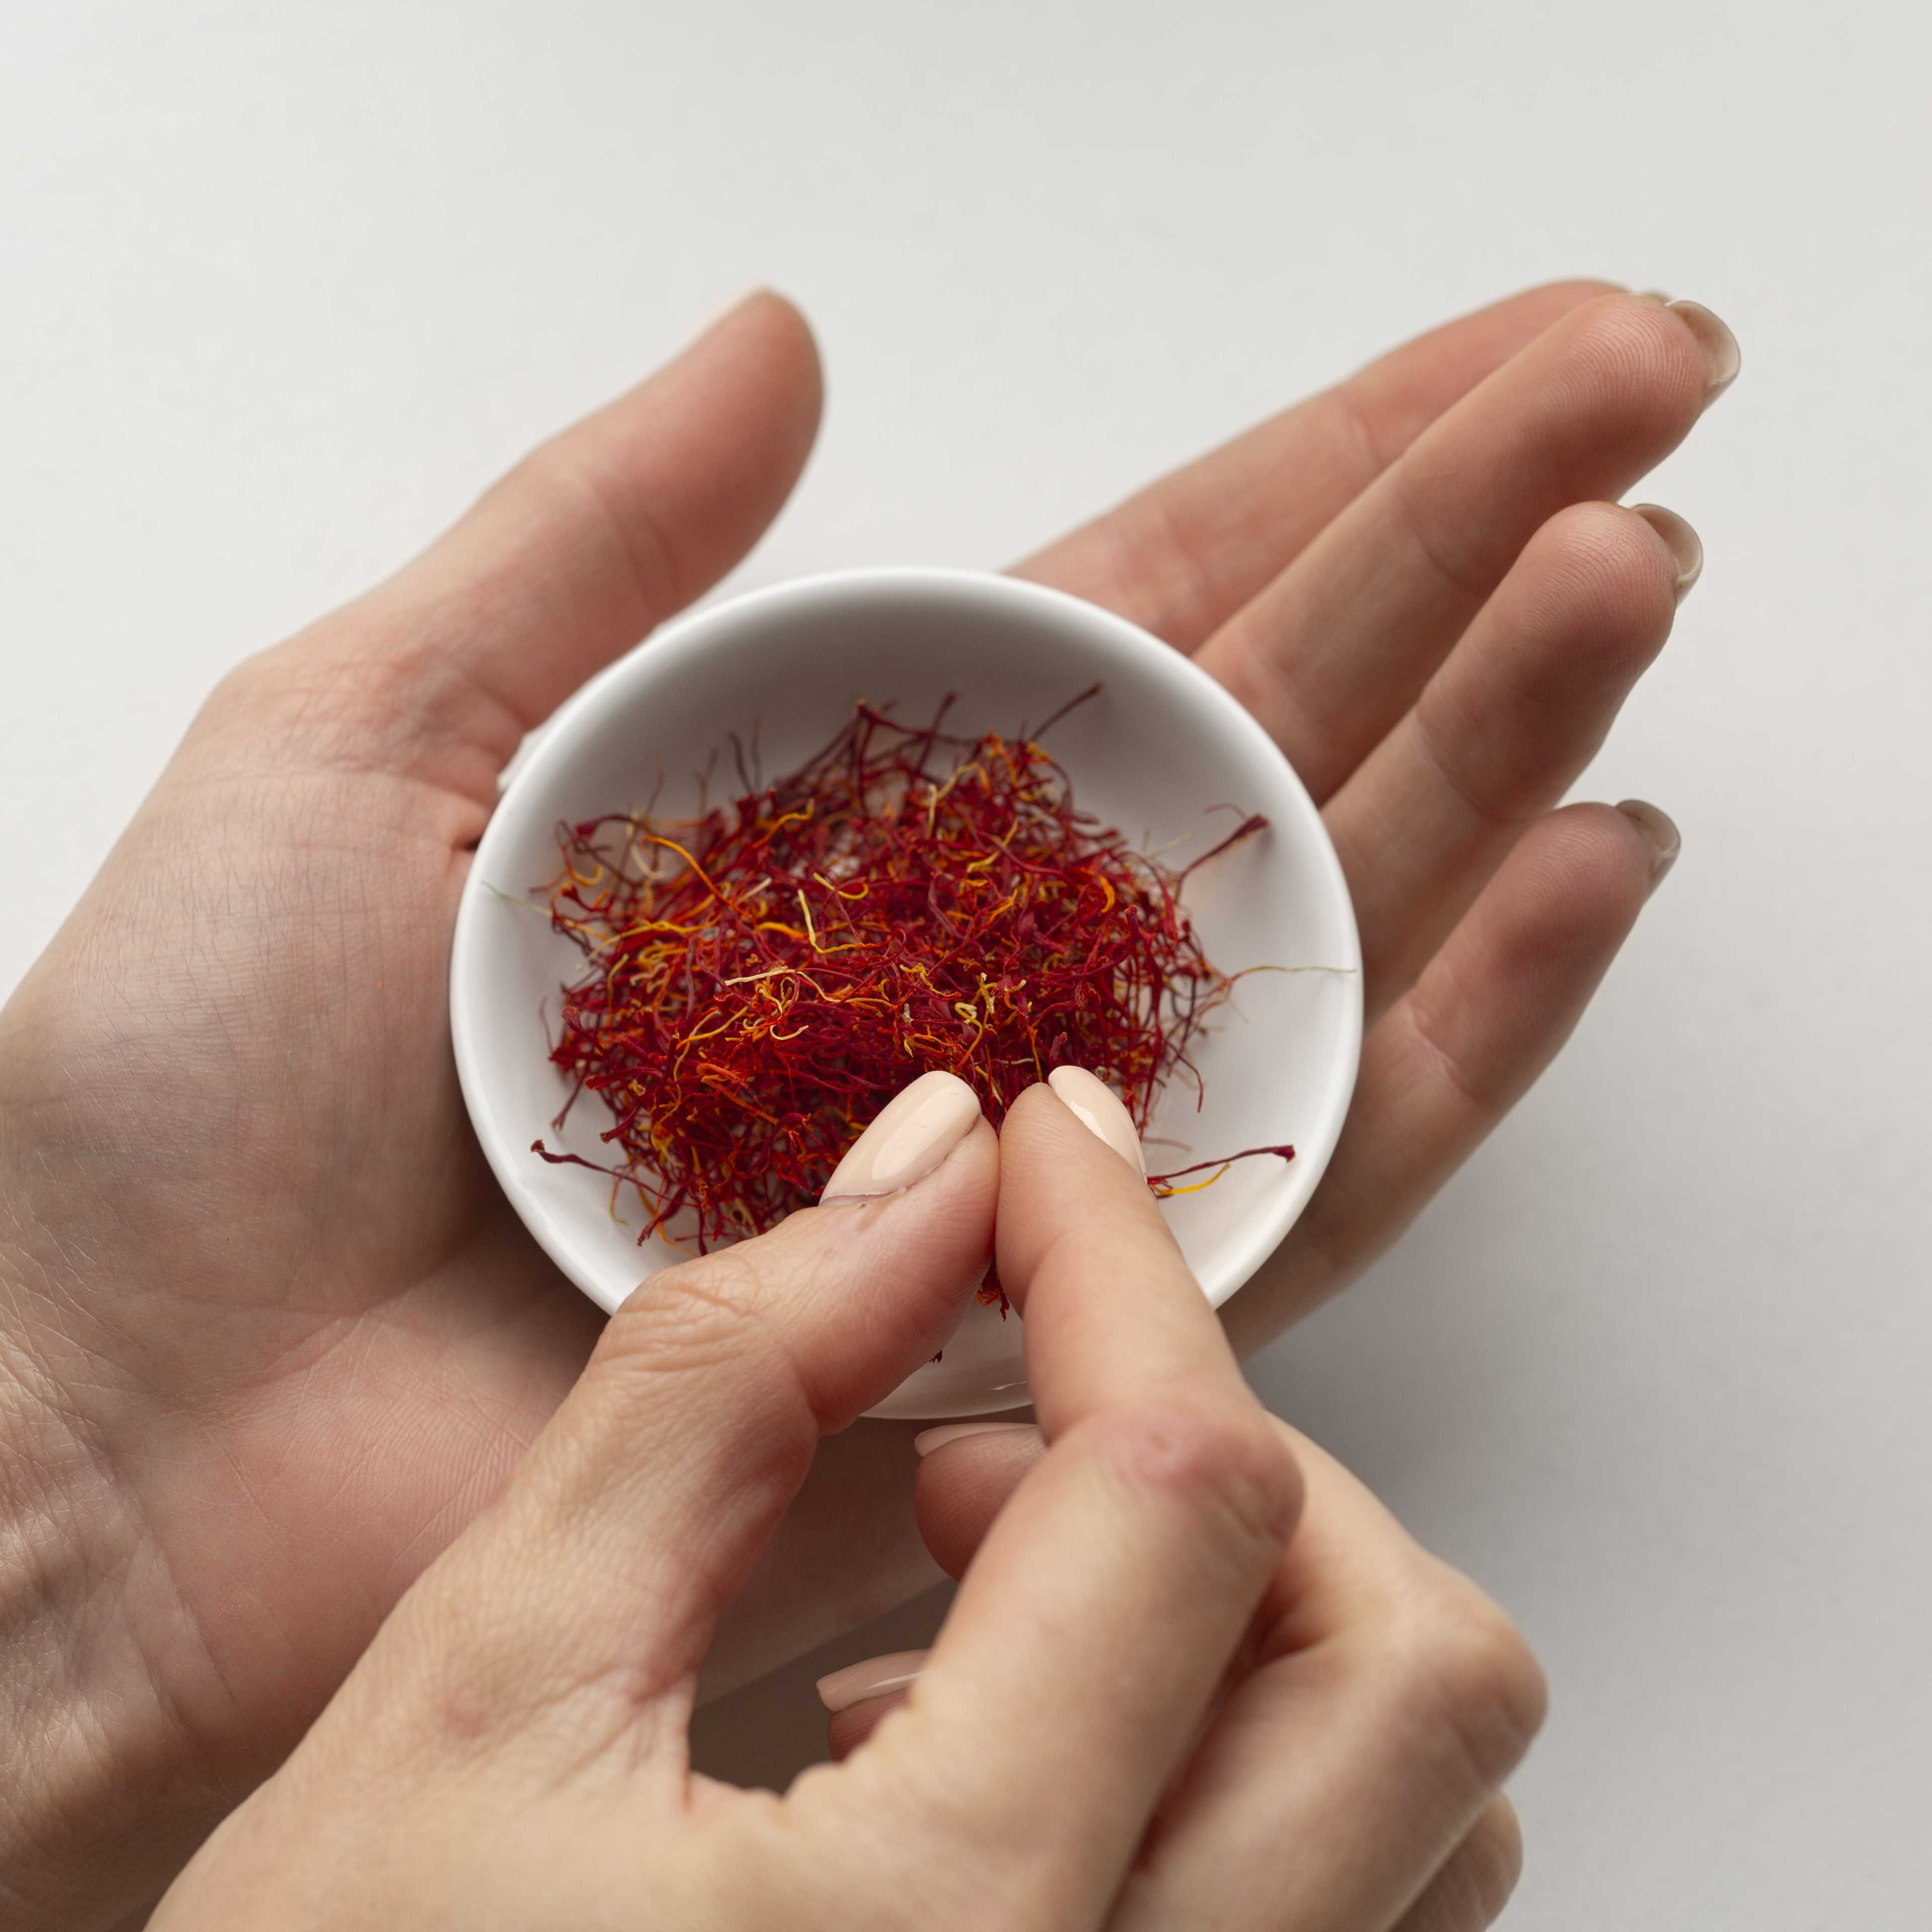 Picture of saffron threads in a small plate